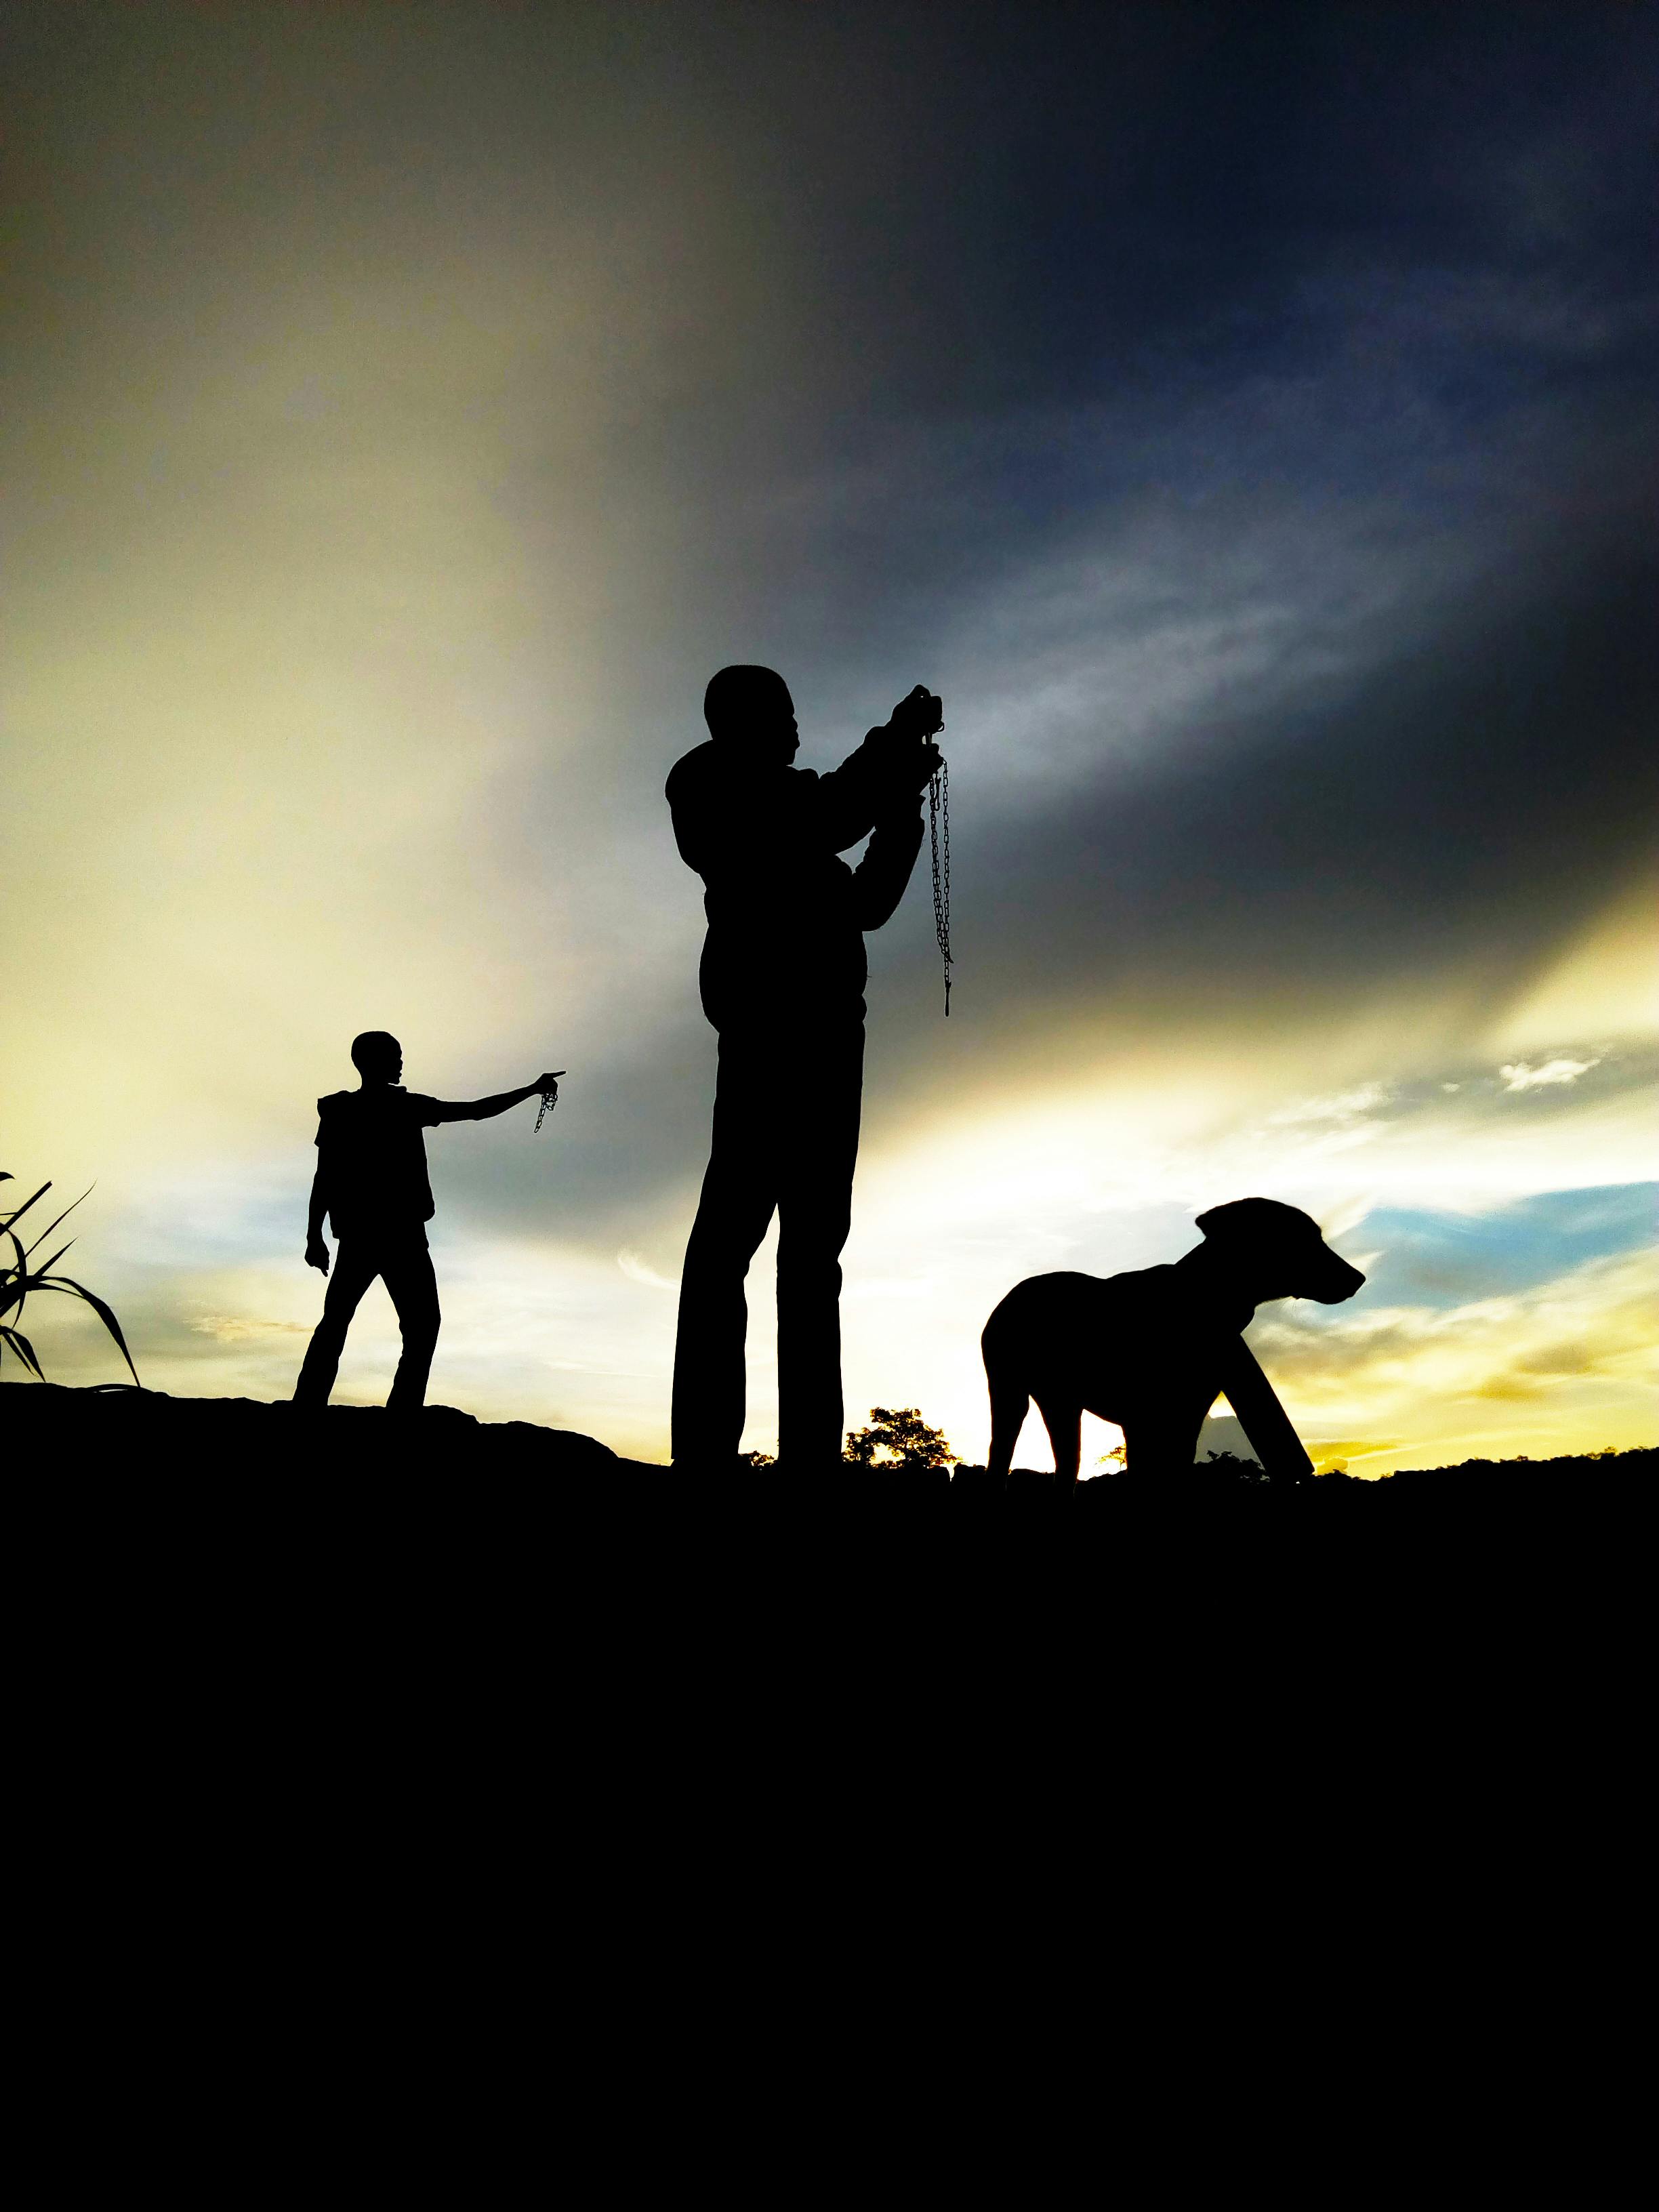 Free stock photo of dog, setting sun, Sihoutte of 2 boys and a dog